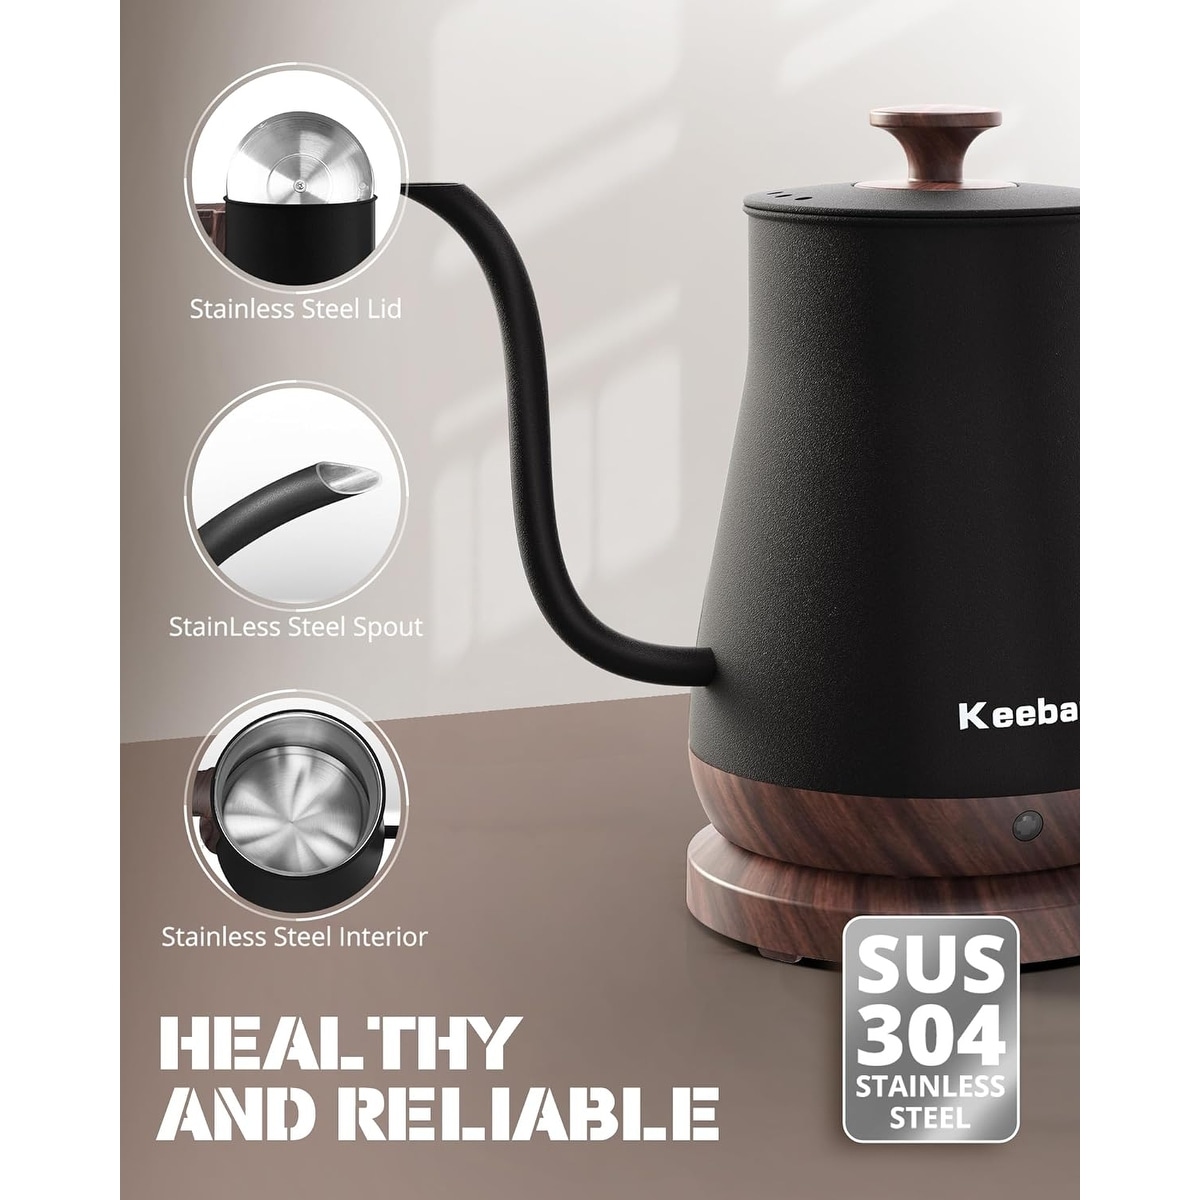  Keebar Electric Kettle, 100% Stainless Steel Tea Kettle,  Electric Gooseneck Kettle with Auto Shut Off, Pour Over Kettle for Coffee &  Tea, 0.8L,1000W,White: Home & Kitchen